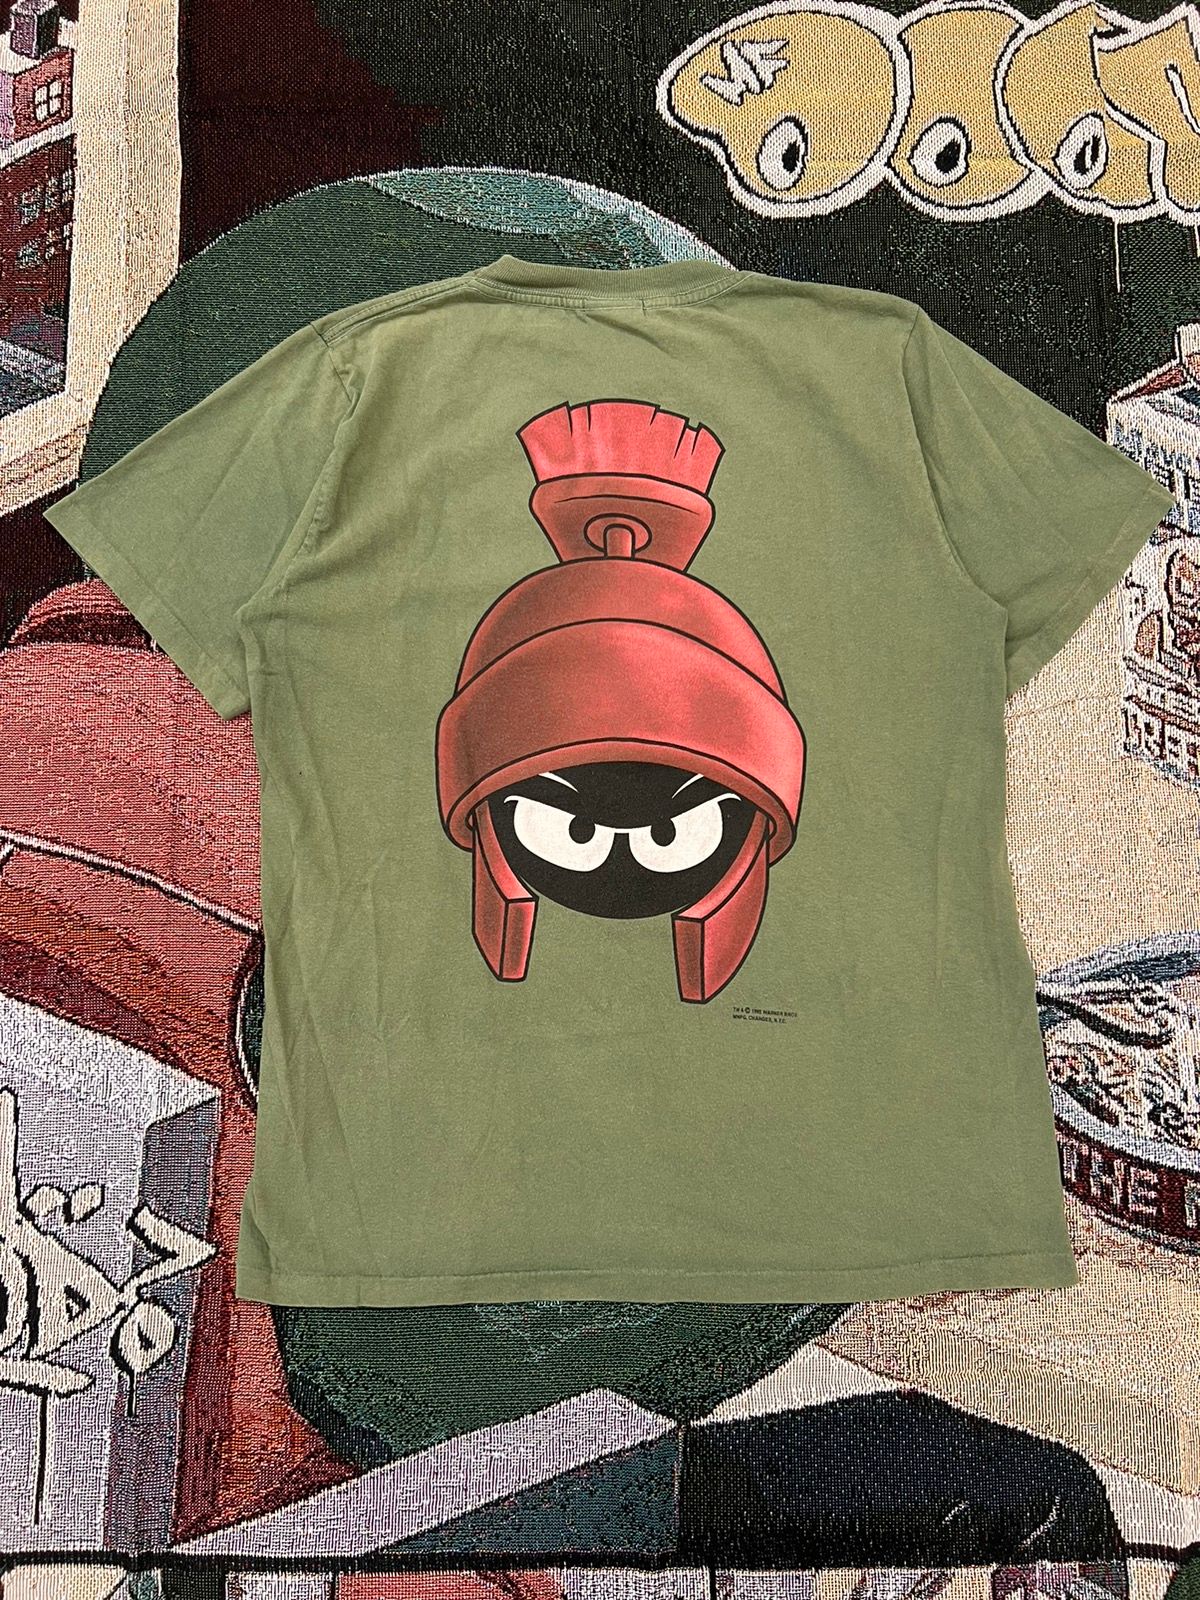 Vintage Marvin The Martian Changes Tee Green Size US L / EU 52-54 / 3 - 2 Preview